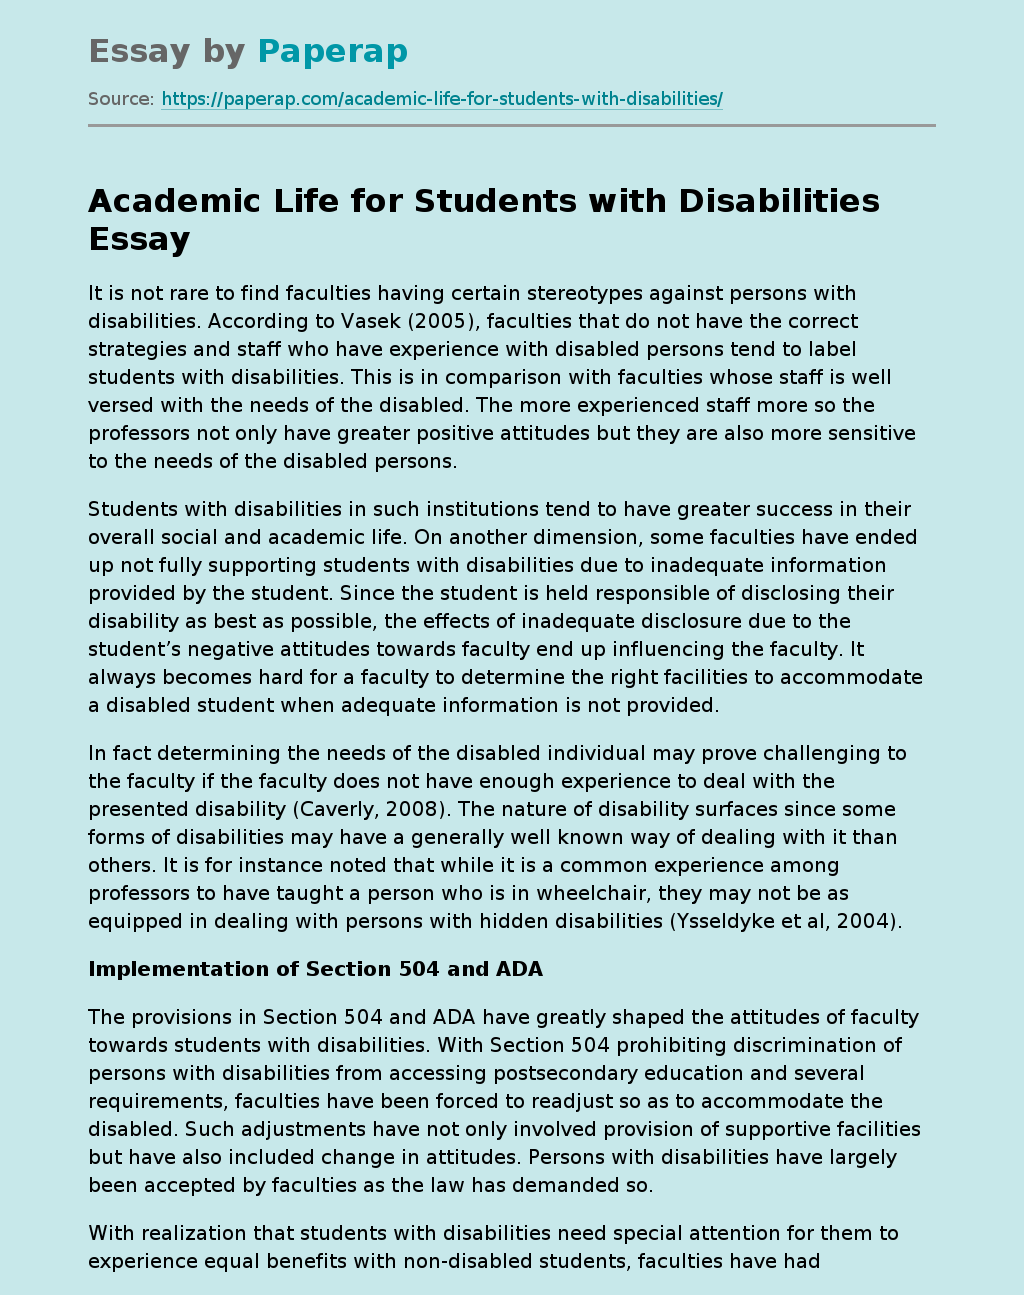 Academic Life for Students with Disabilities